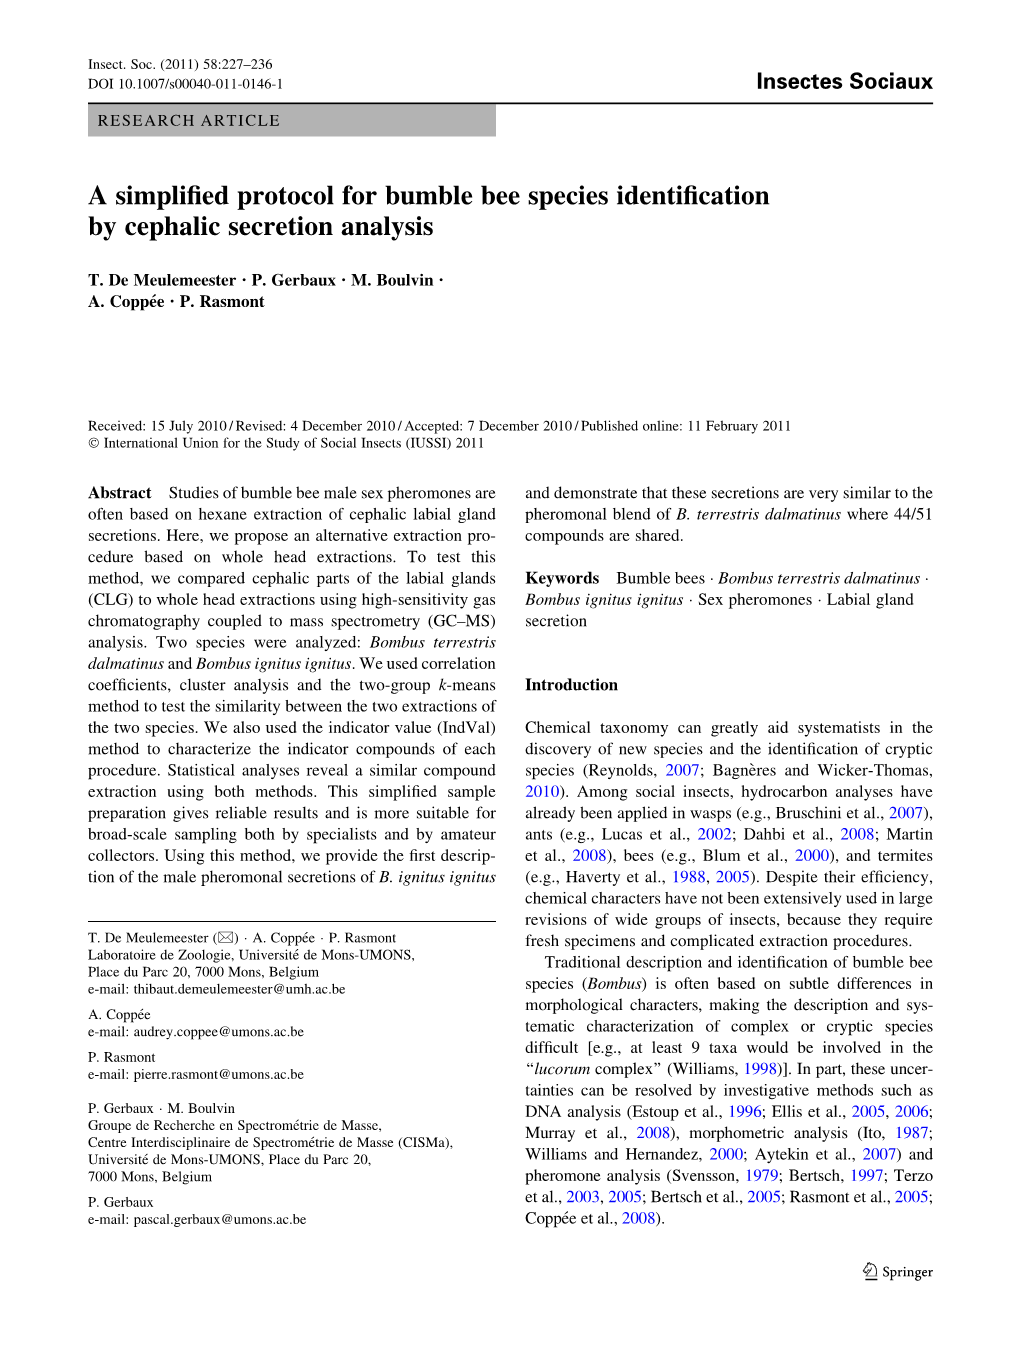 A Simplified Protocol for Bumble Bee Species Identification by Cephalic Secretion Analysis